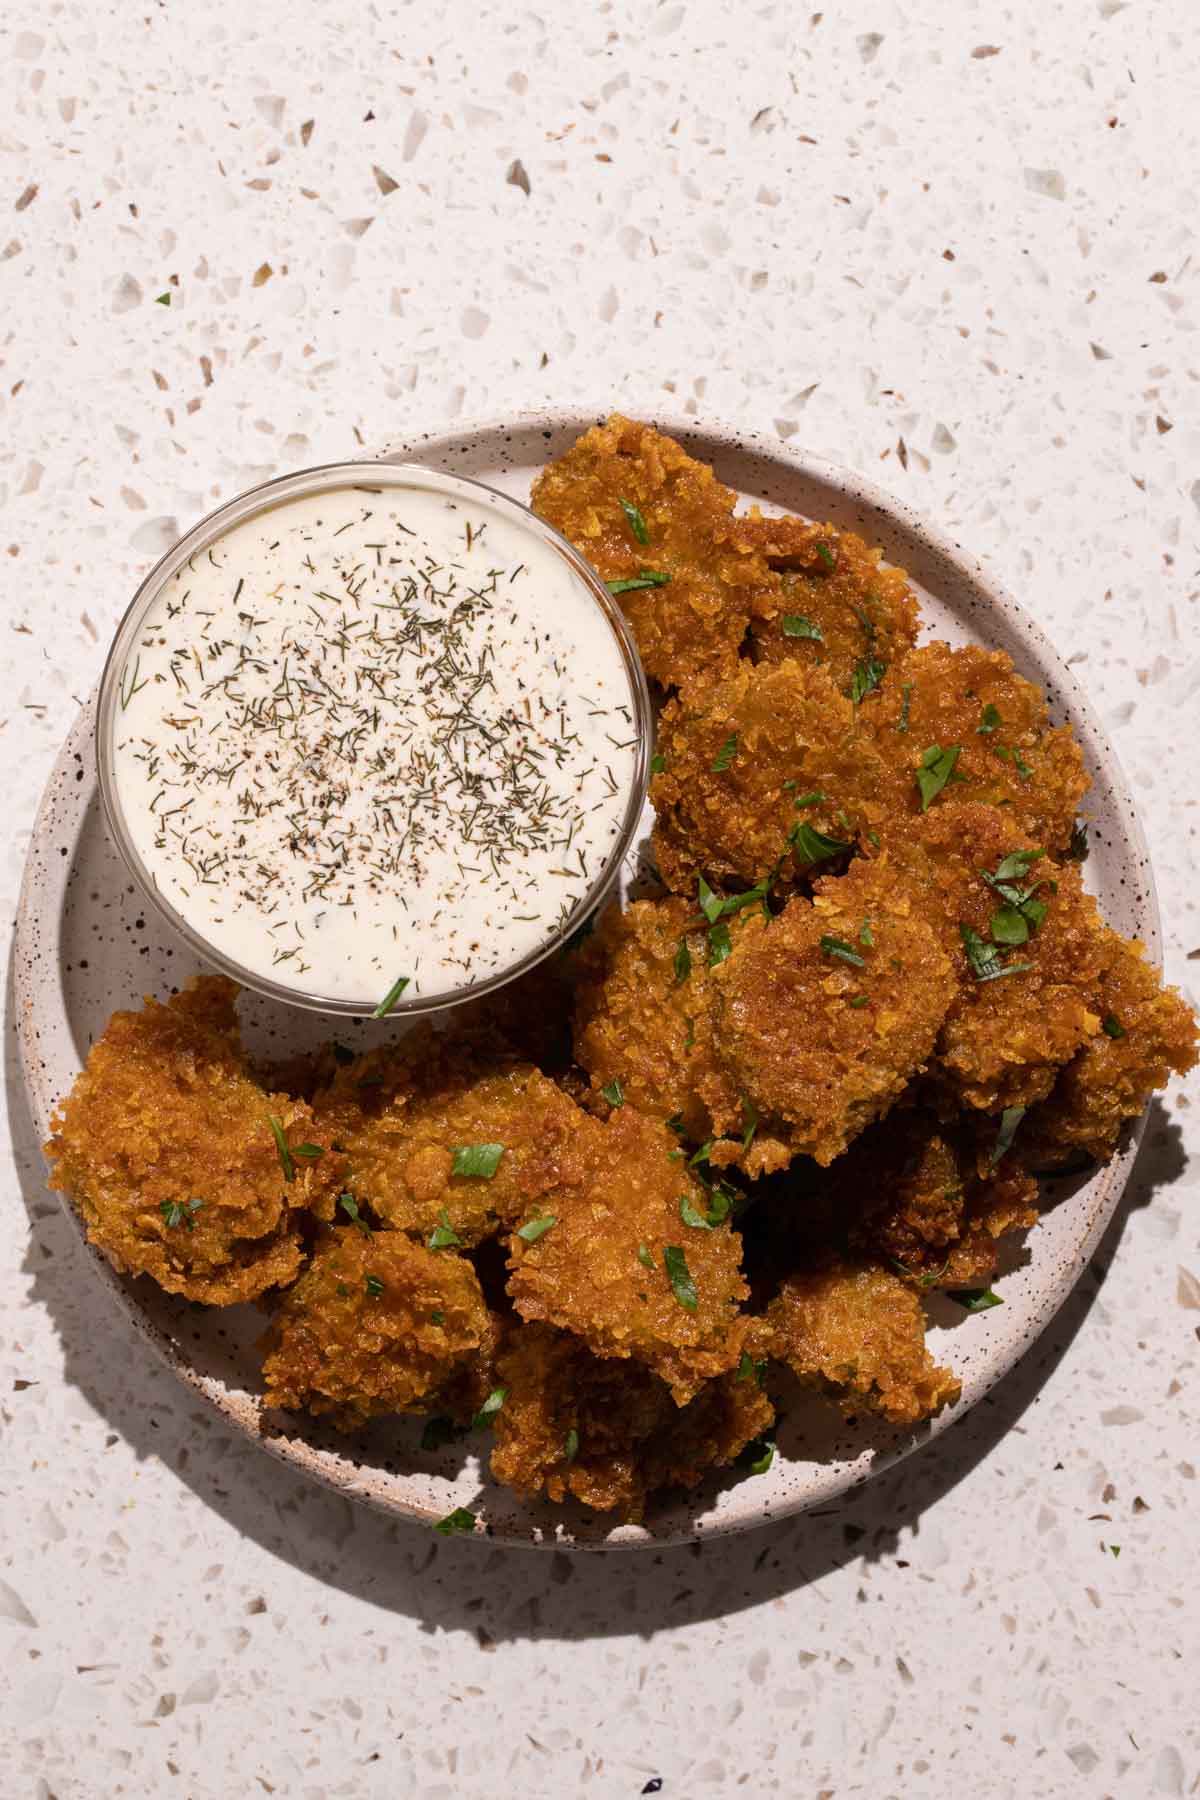 A plate with Fried pickles and dill pickle ranch dressing